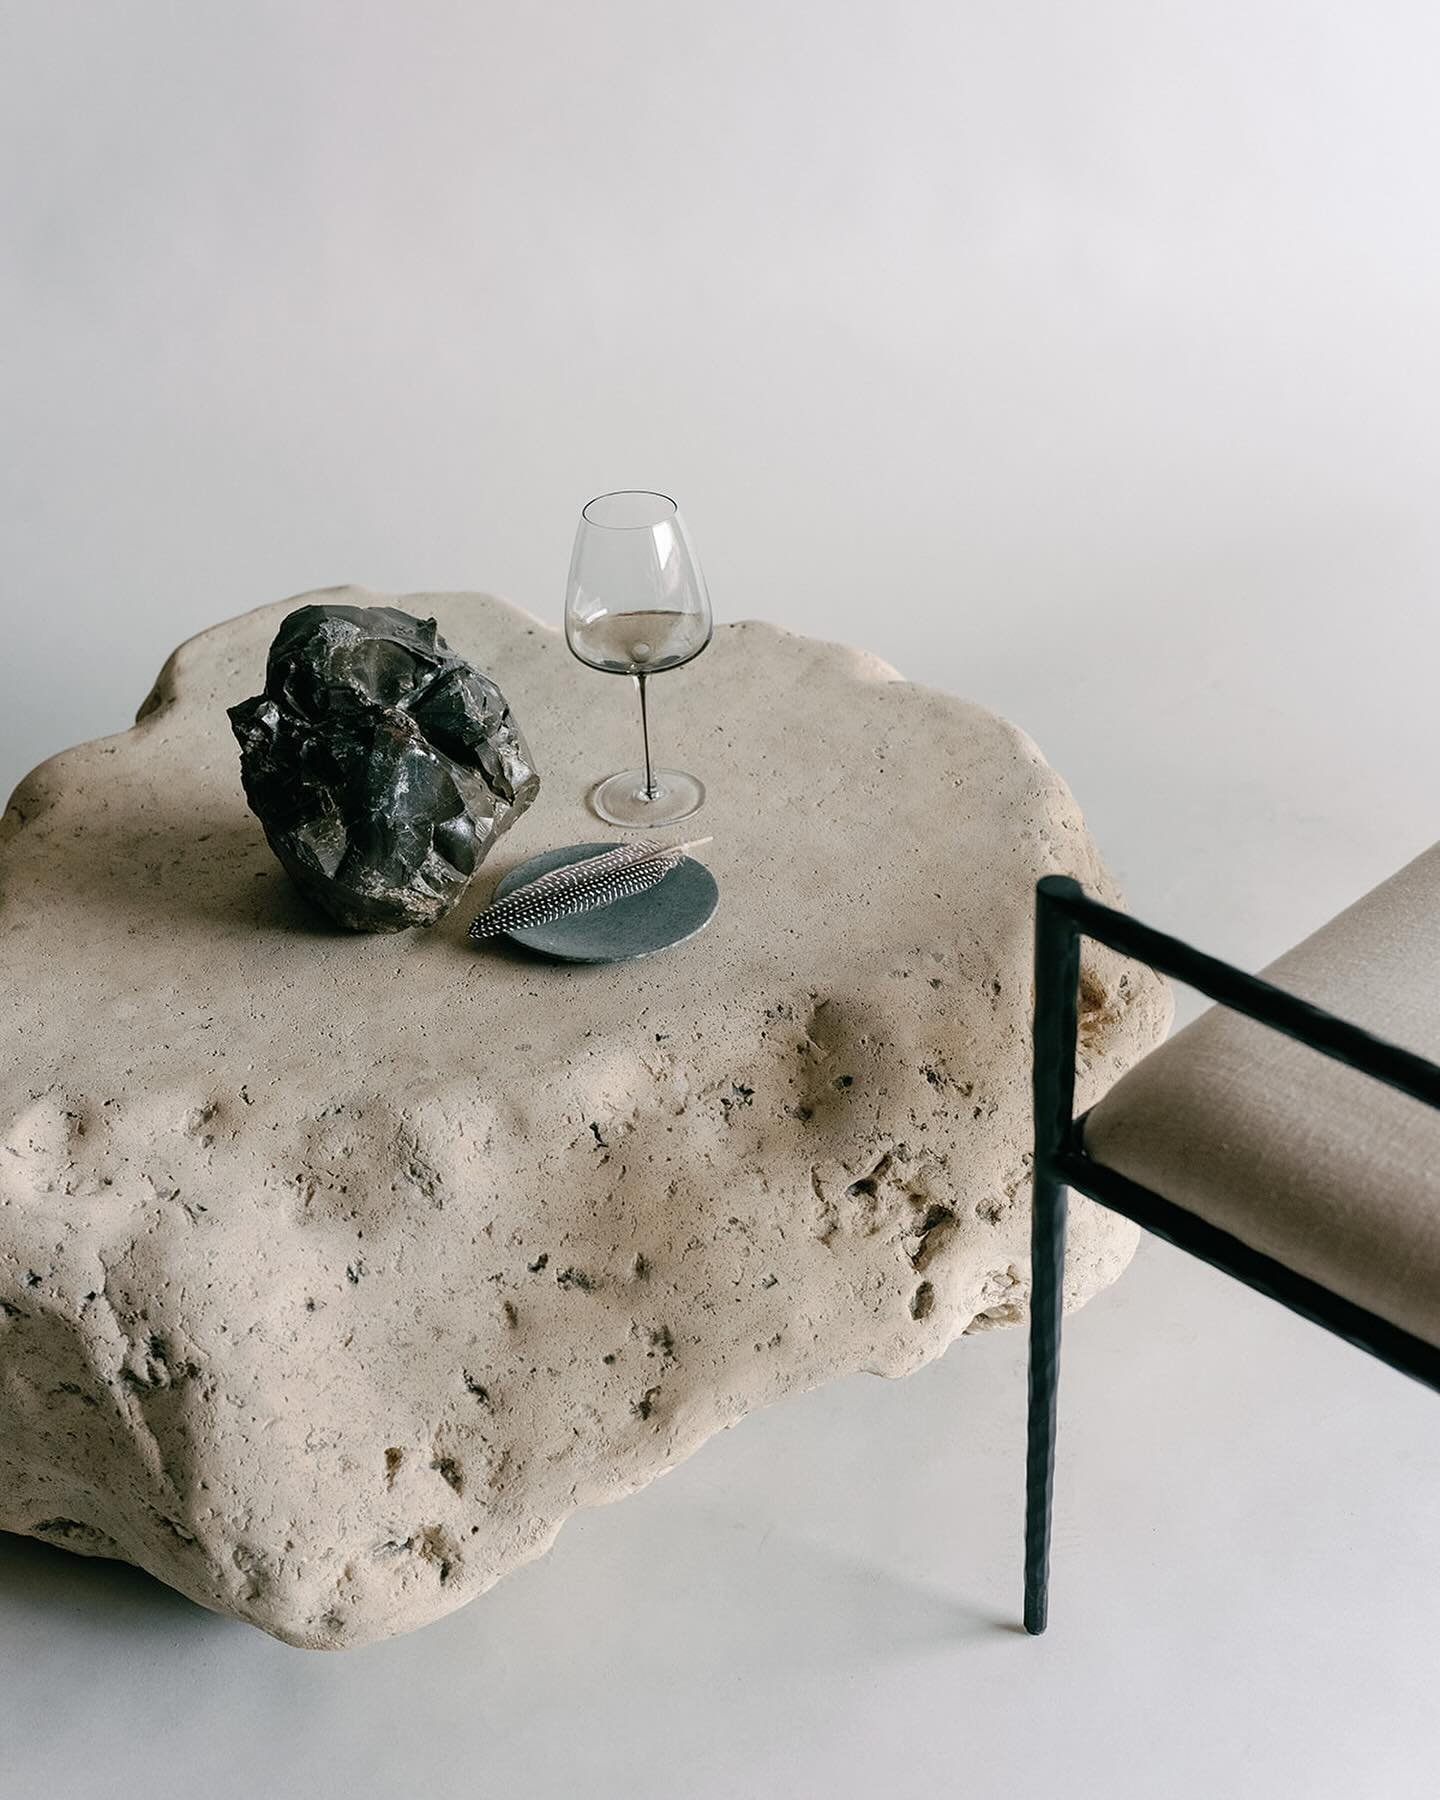 ALL THE ELEMENTS.

We&rsquo;re redefining luxury with organic elements in every aspect of event design. From sturdy rock to sleek marble, accented with hints of gold and monochrome themes, our decor invites the abstract, ensuring your event captures 